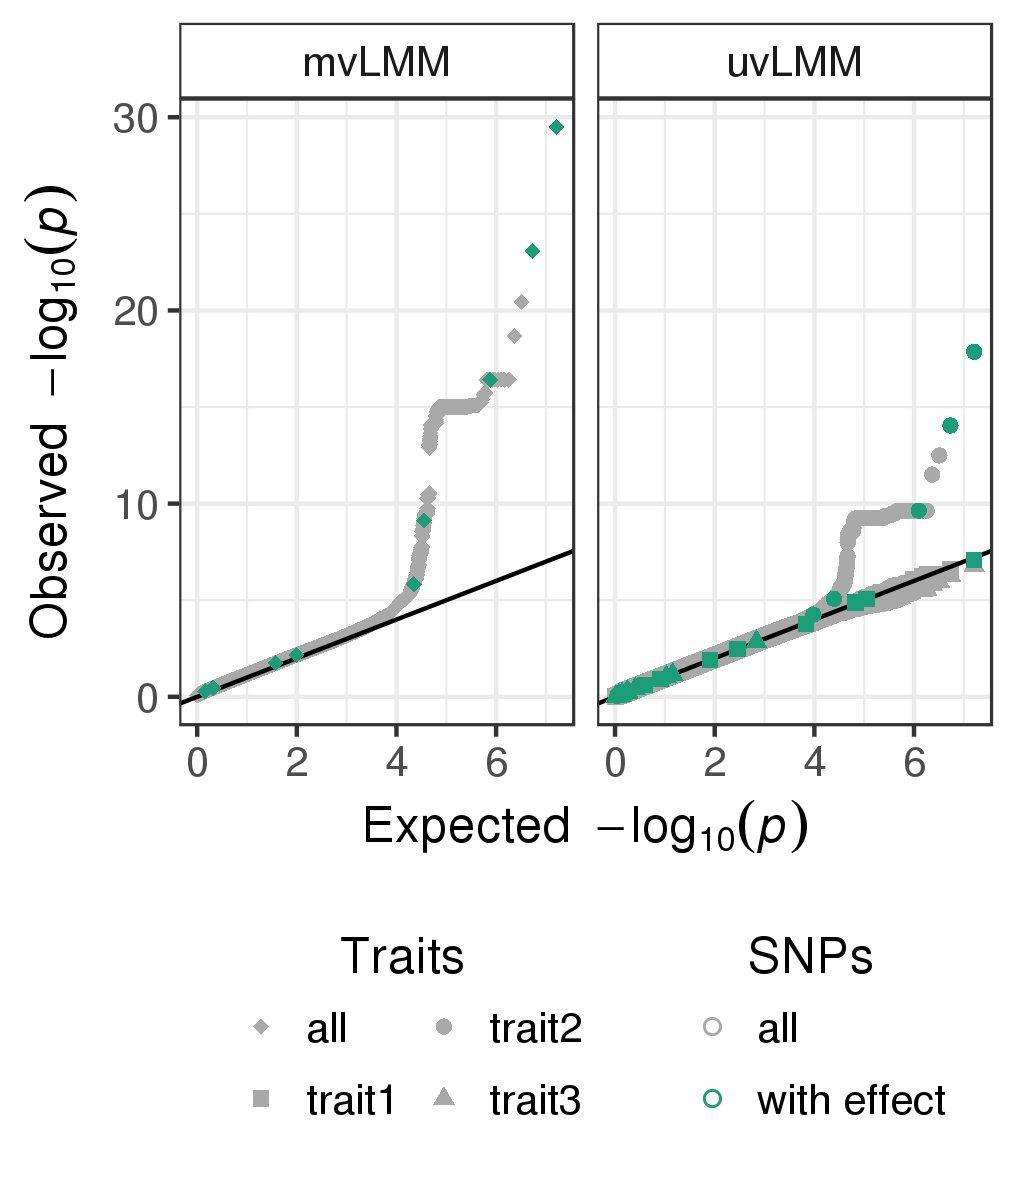 \label{fig:qqplot}Quantile-quantile plots of p-values observed from the multivariate linear mixed model (mvLMM, traits:all) and the univariate linear mixed models (uvLMM, traits: trait1/trait2/trait3) fitted to each of about eight million genome-wide SNPs (grey), including the ten SNPs for which a phenotype effect was modelled (green).